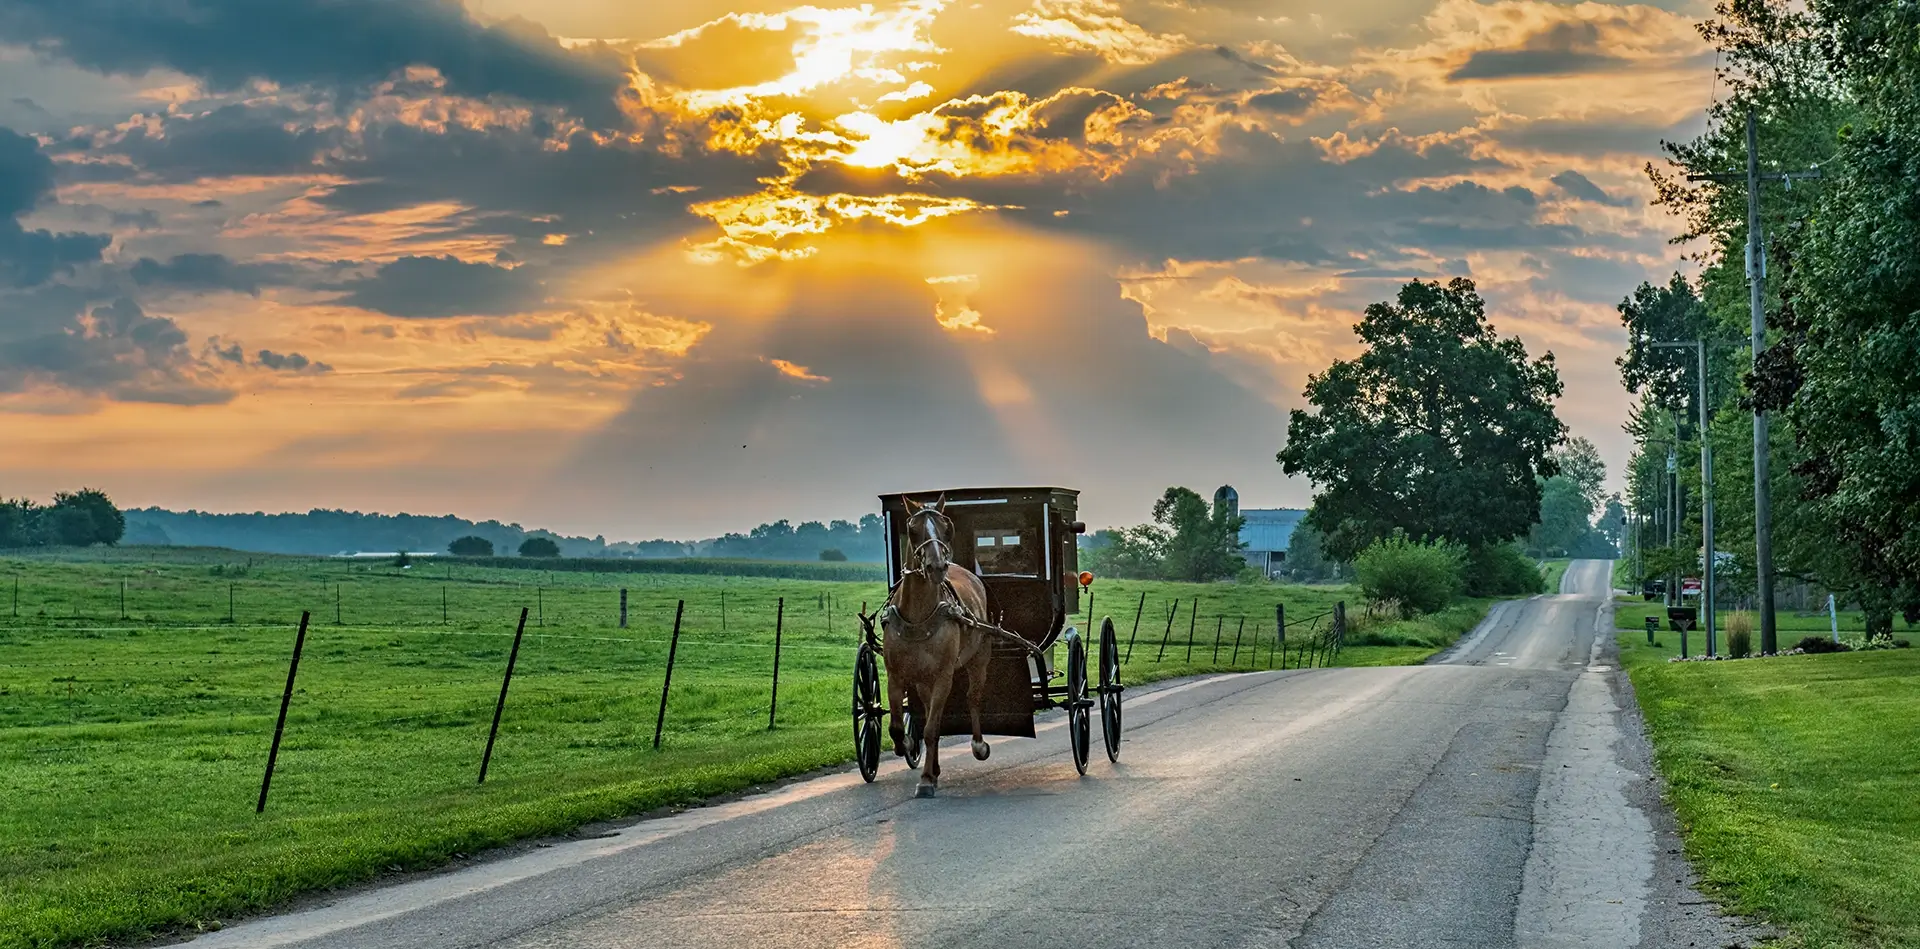 » Country Heritage Tours » Country Heritage Tours Amish horse and buggy traveling down the road with green grass fields behind